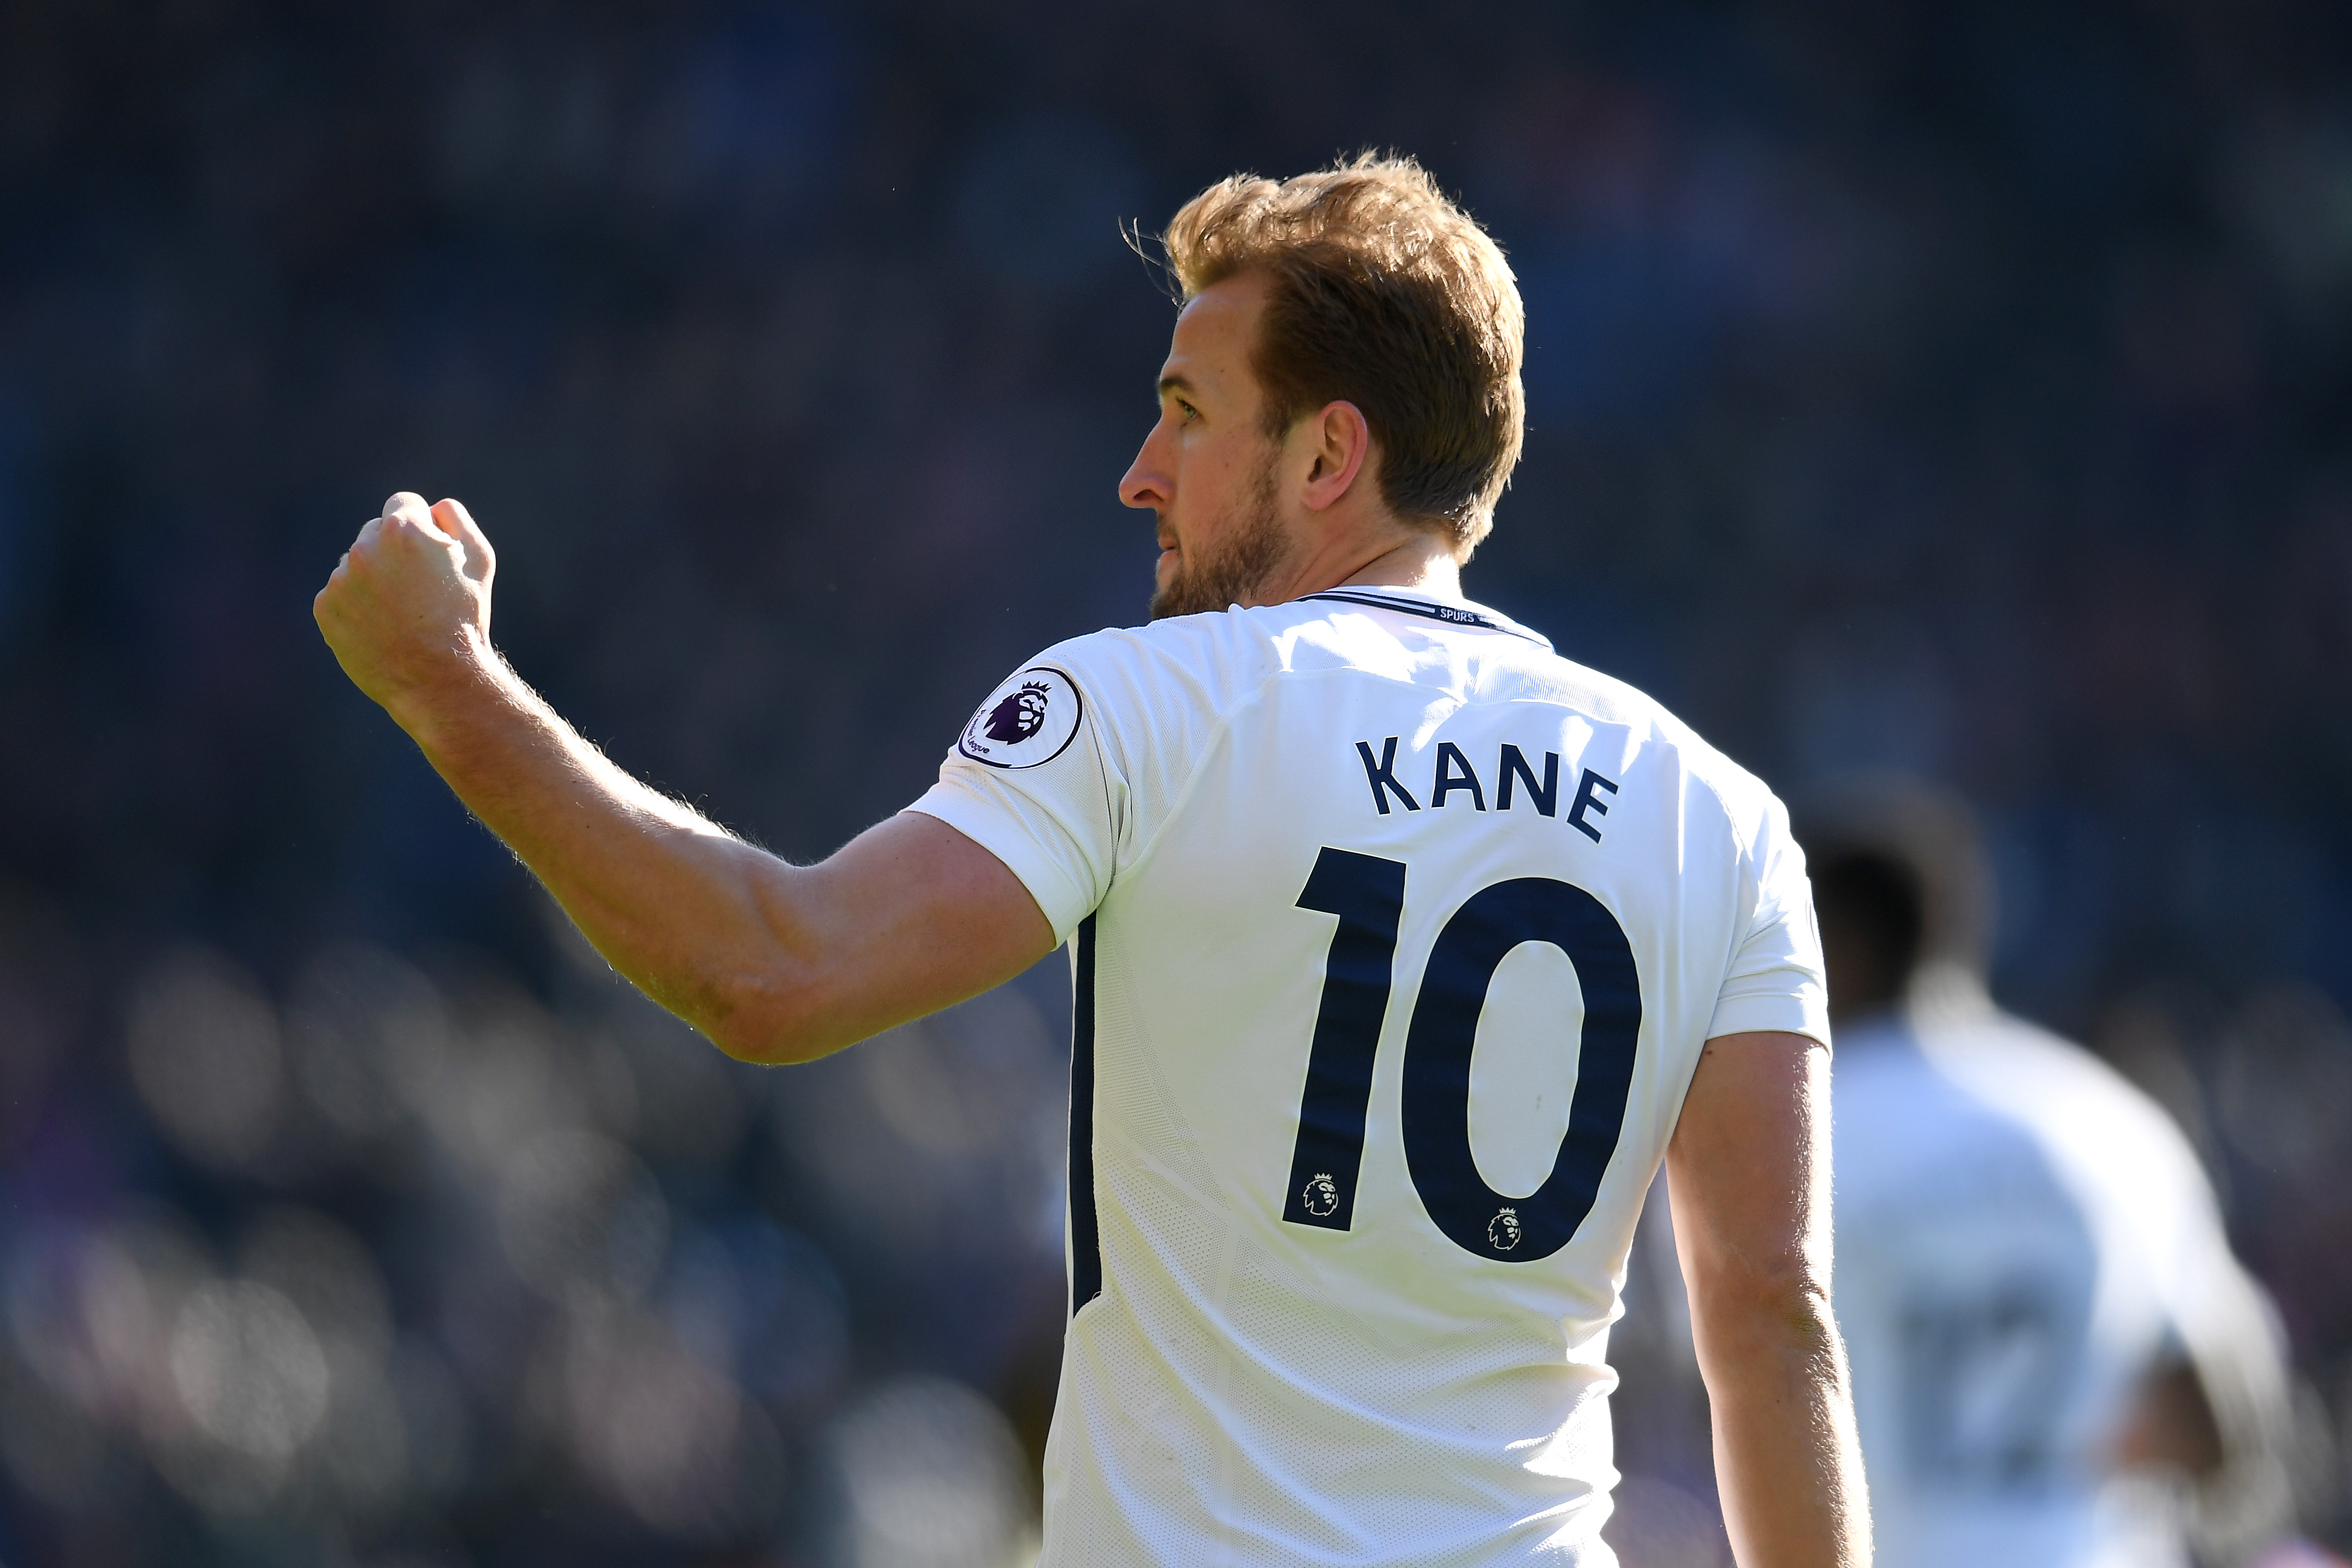 LONDON, ENGLAND - FEBRUARY 25:  Harry Kane of Tottenham Hotspur celebrates after scoring his sides first goal during the Premier League match between Crystal Palace and Tottenham Hotspur at Selhurst Park on February 25, 2018 in London, England.  (Photo by Mike Hewitt/Getty Images)